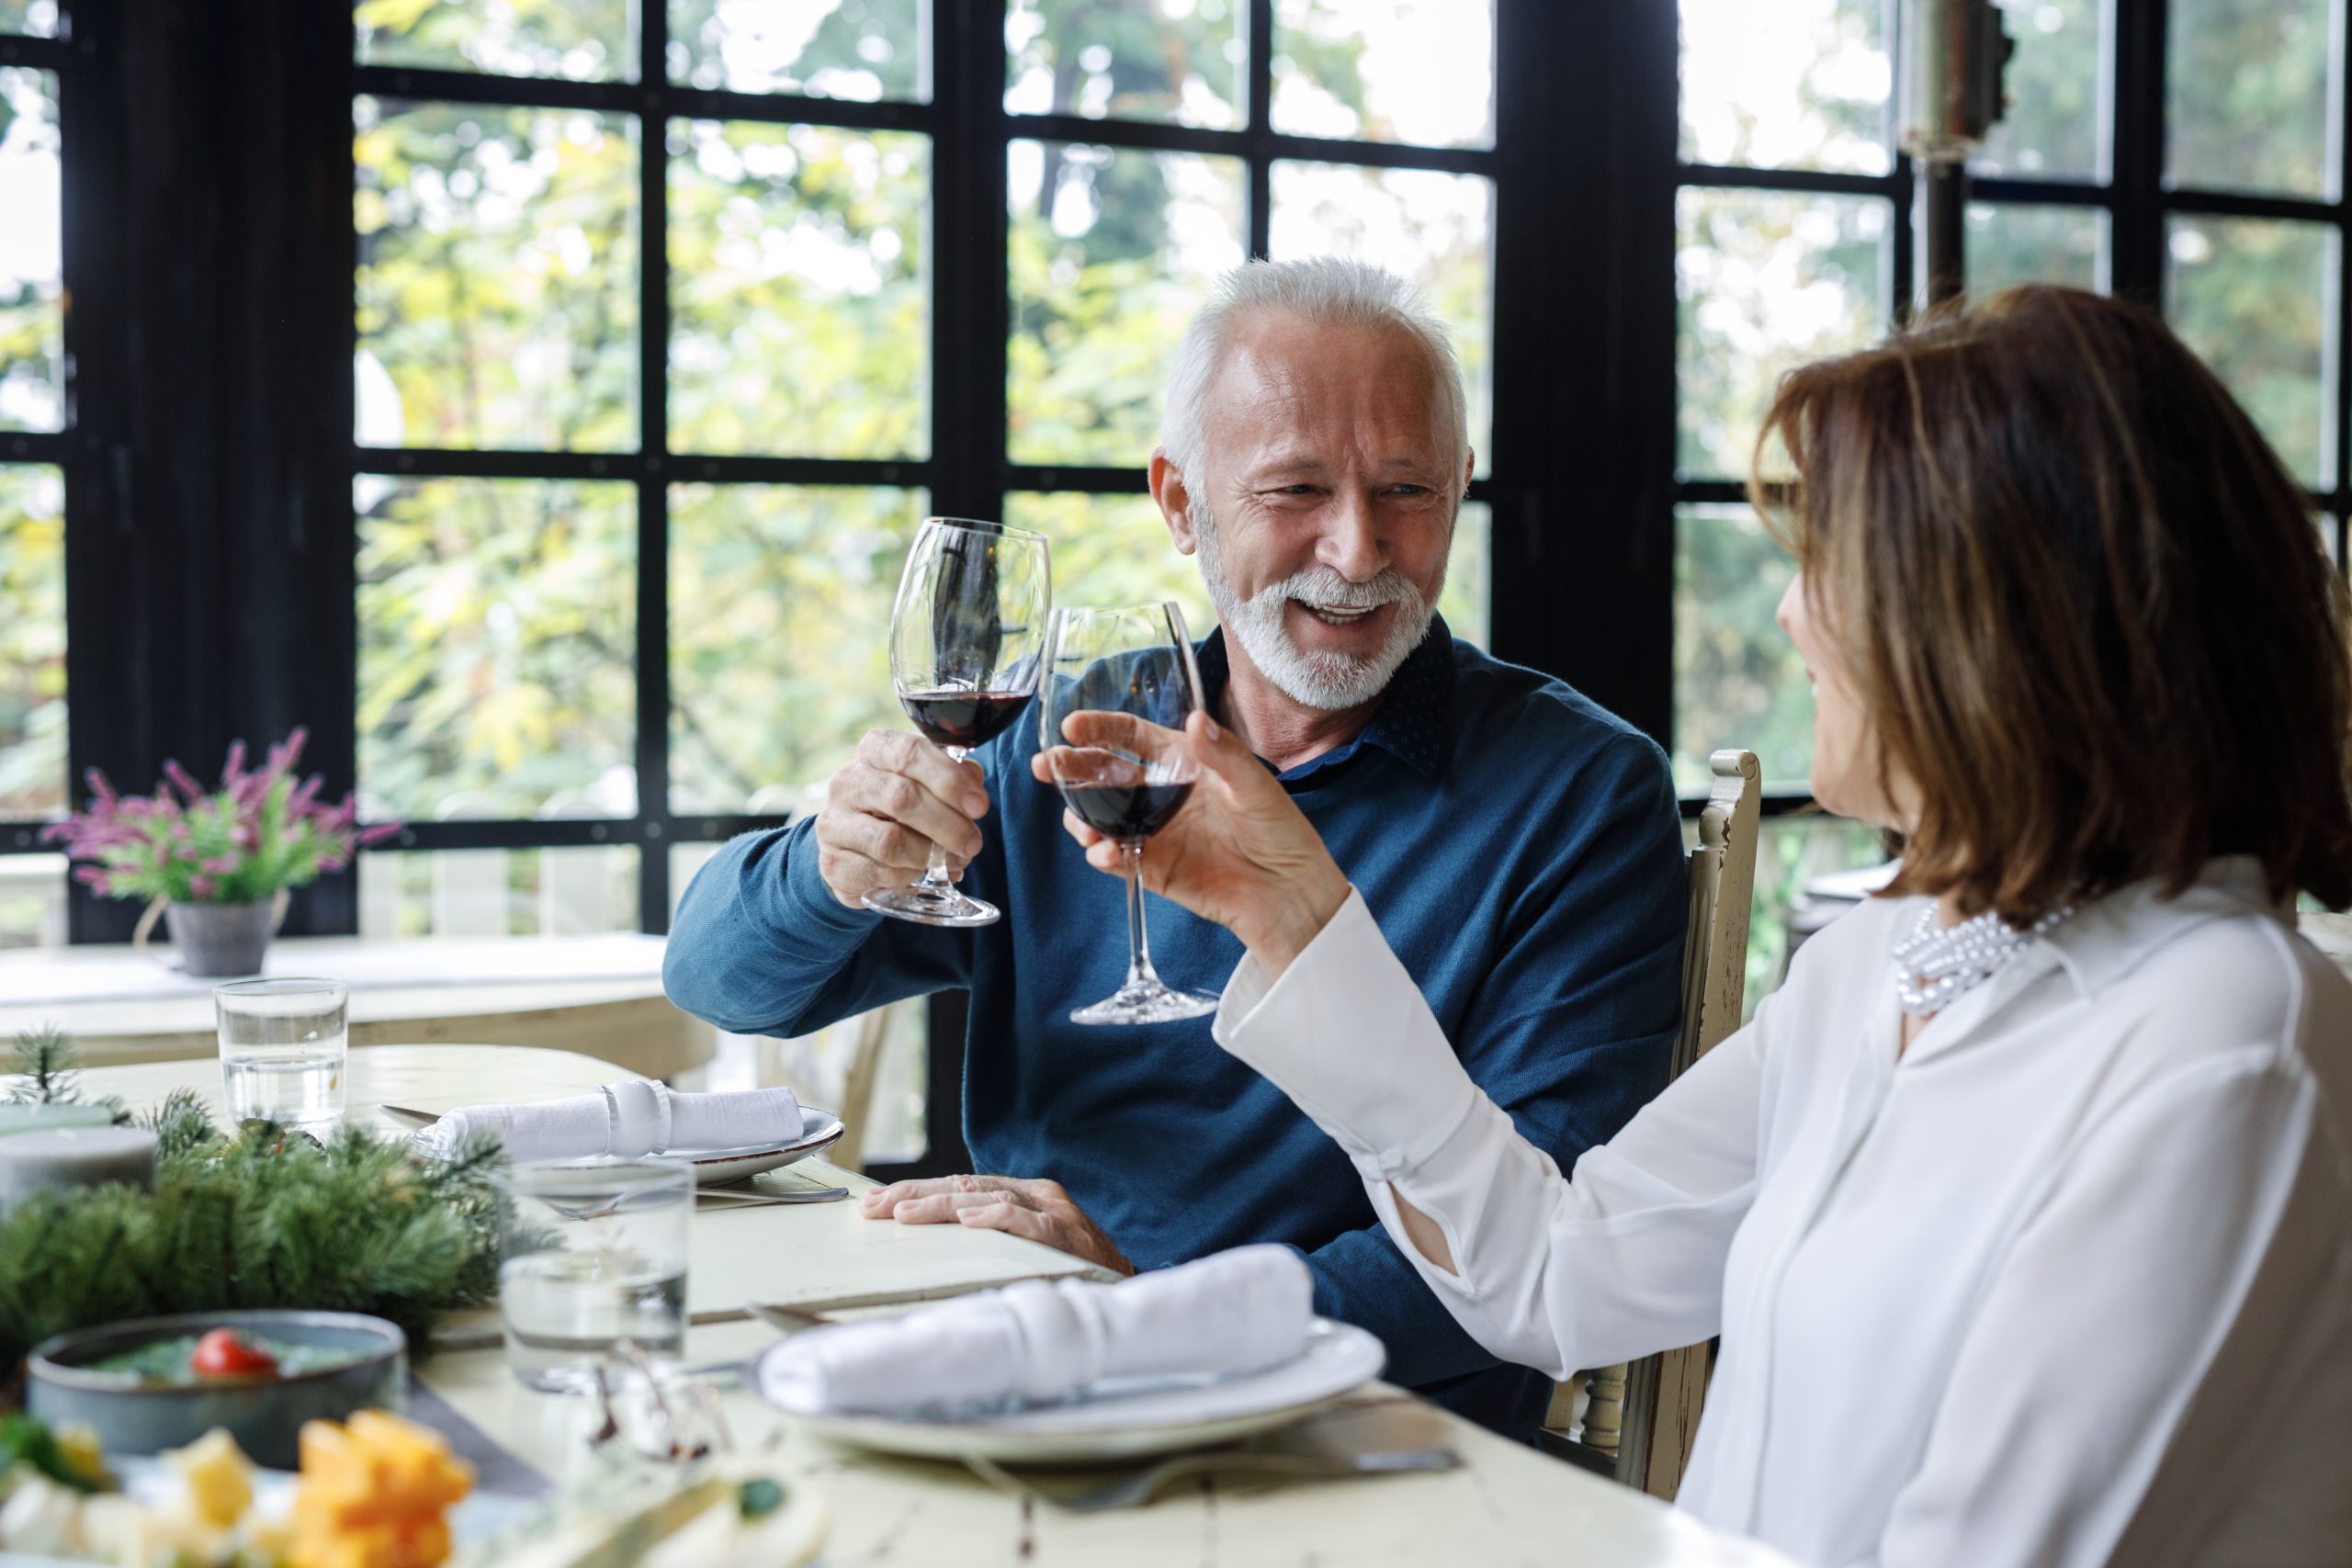 An elderly couple celebrating with wine at a restaurant, raising their glasses in a toast